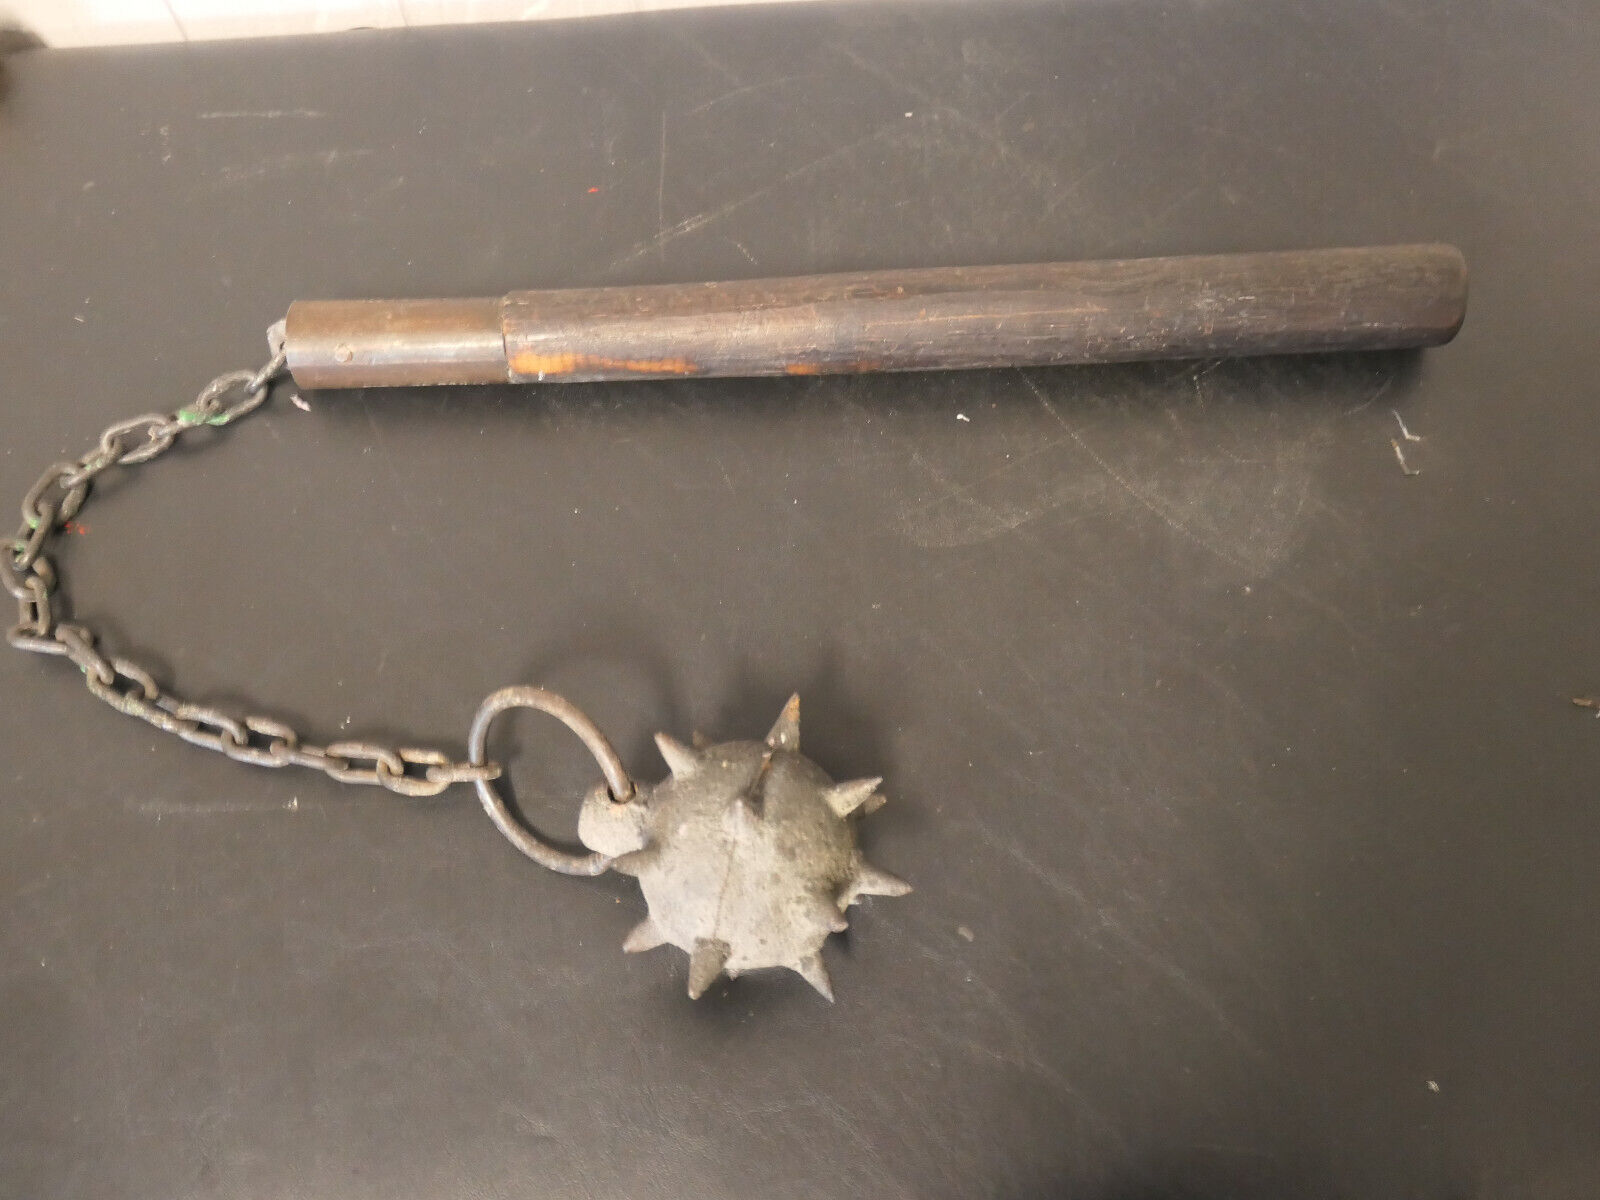 Antique Medieval Flail Morning Star Mace & Chain Pole Weapon Made In Spain #1